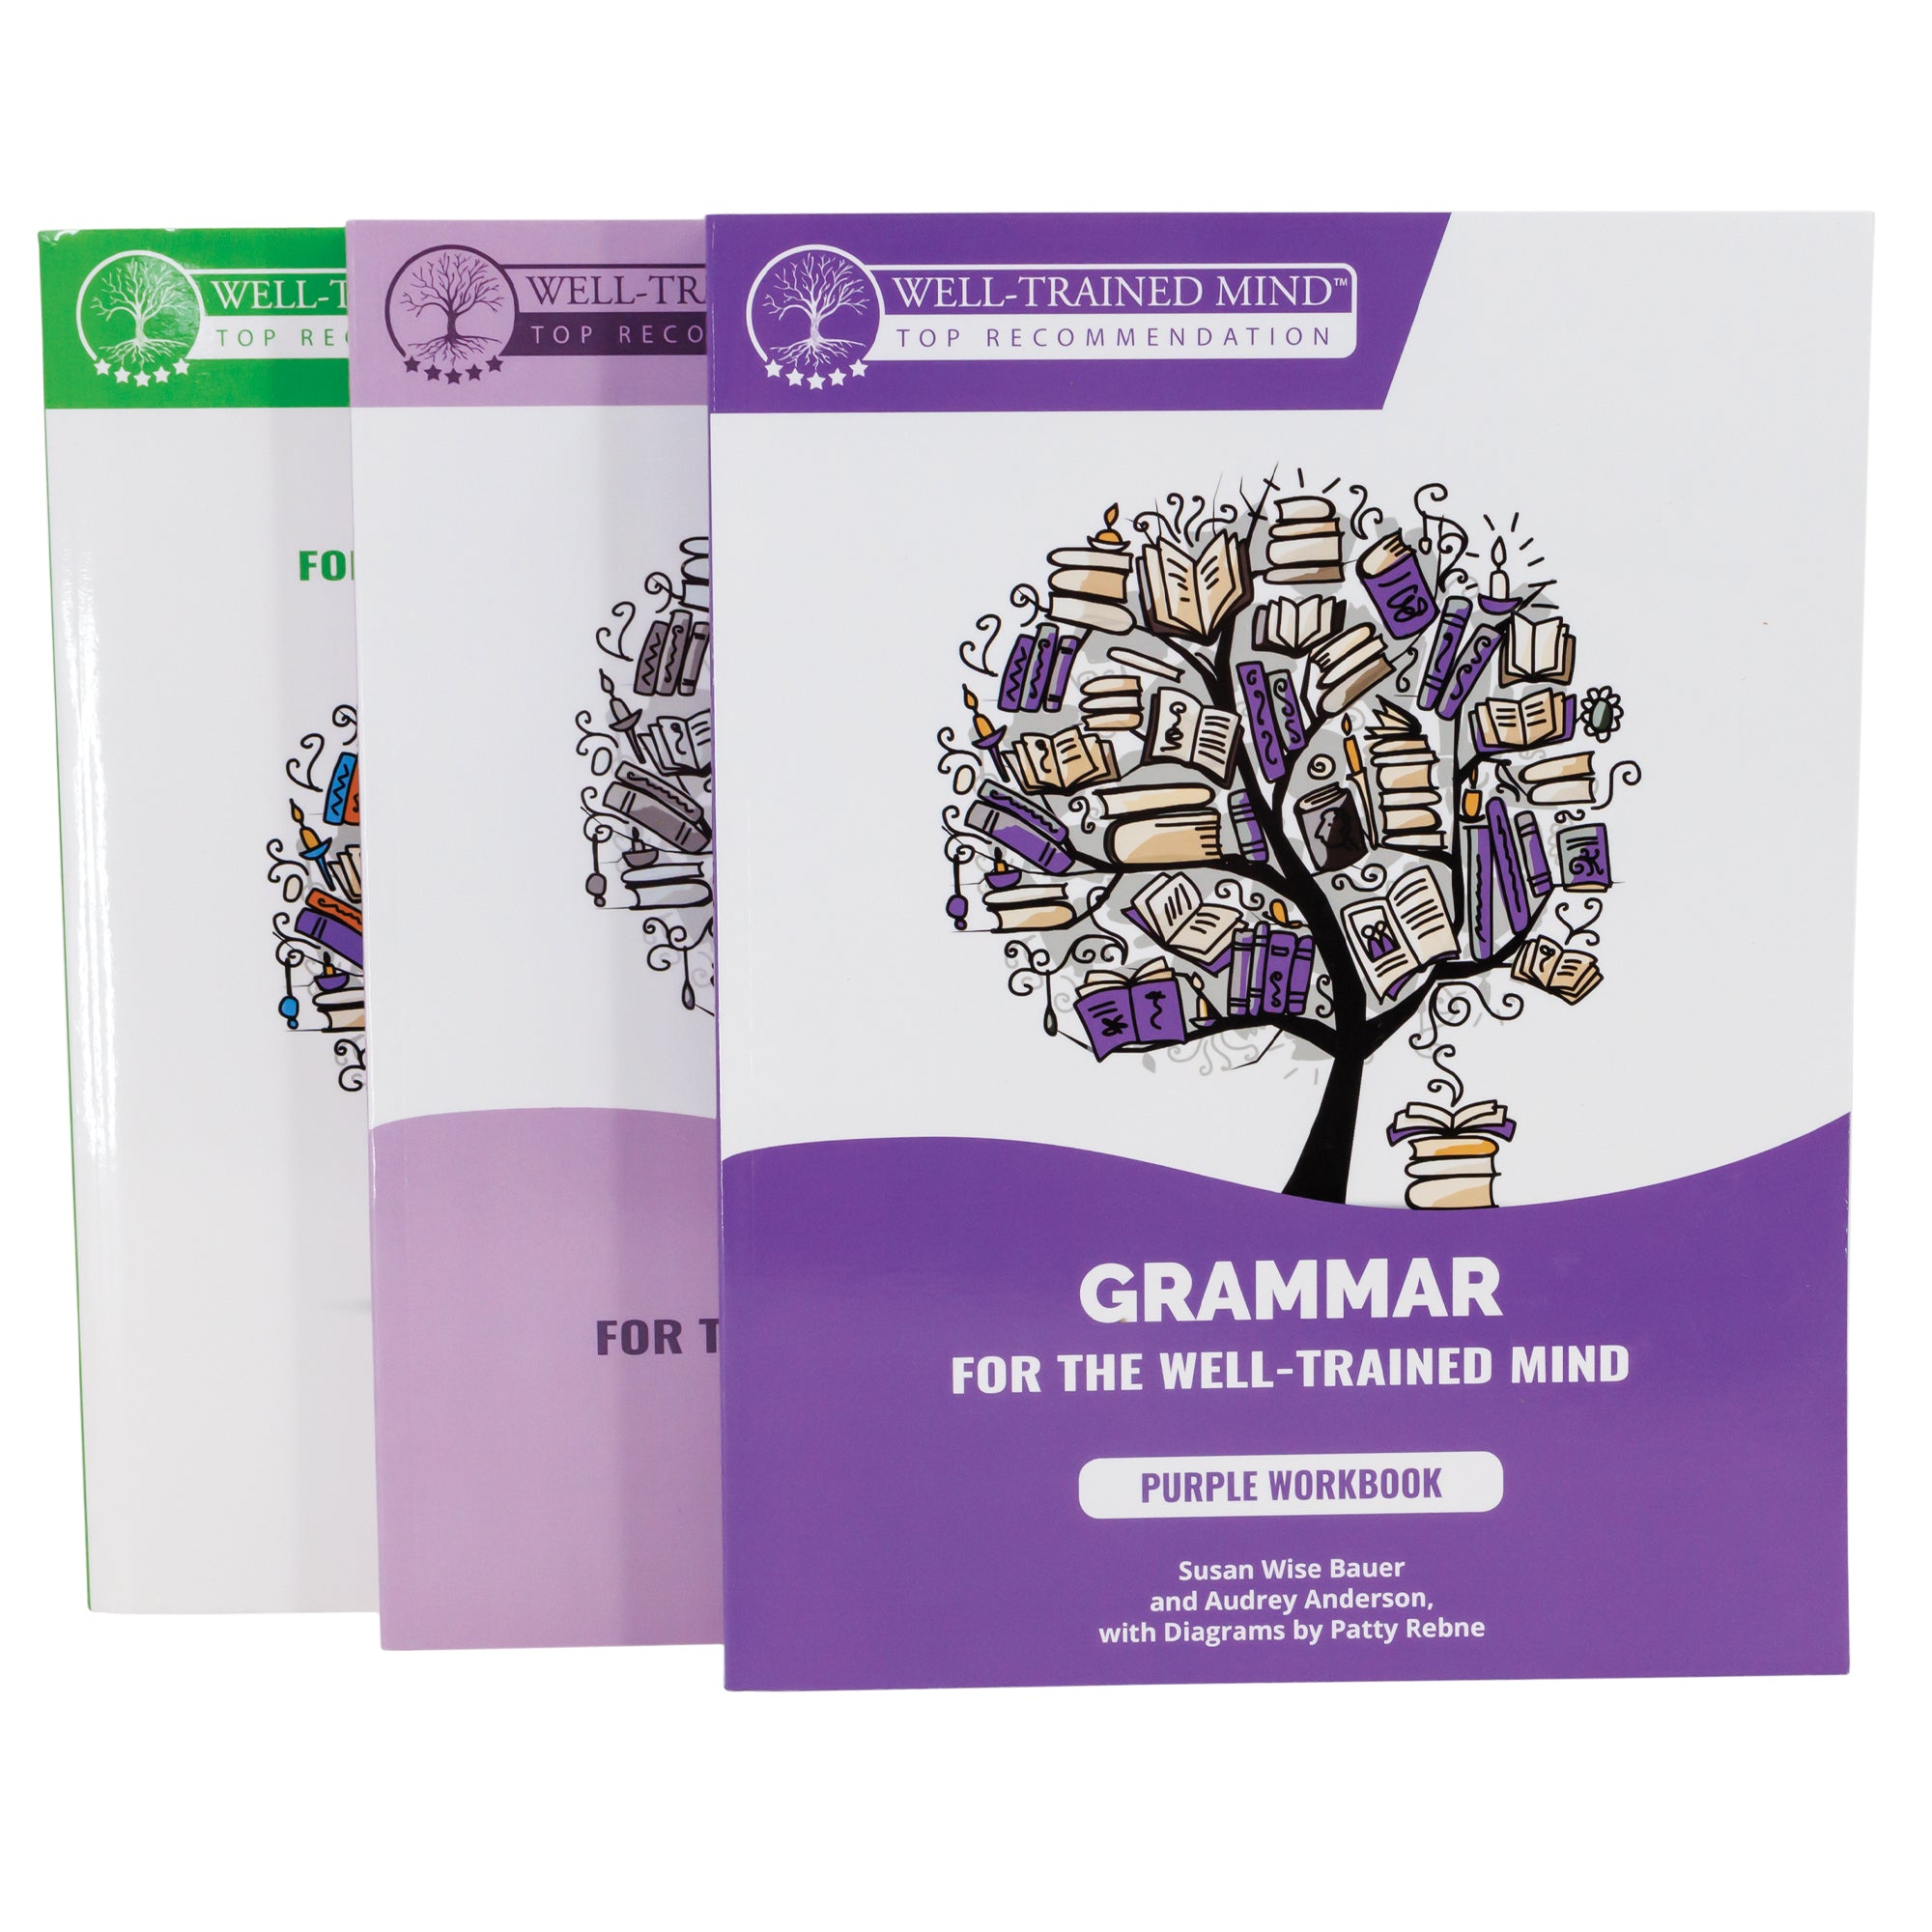 Grammar for the Well-Trained Mind purple bundle of 3 books. The front book has a white top and a purple bottom with a wave shape between the 2 colors. There is an illustration in the white section of a tree with books for leaves and a stack of books near the trunk. In the purple section at the bottom is white text, including the title and “Purple Workbook.” Tucked behind the purple book is a lighter purple version of this book, then a green version behind the light purple book.